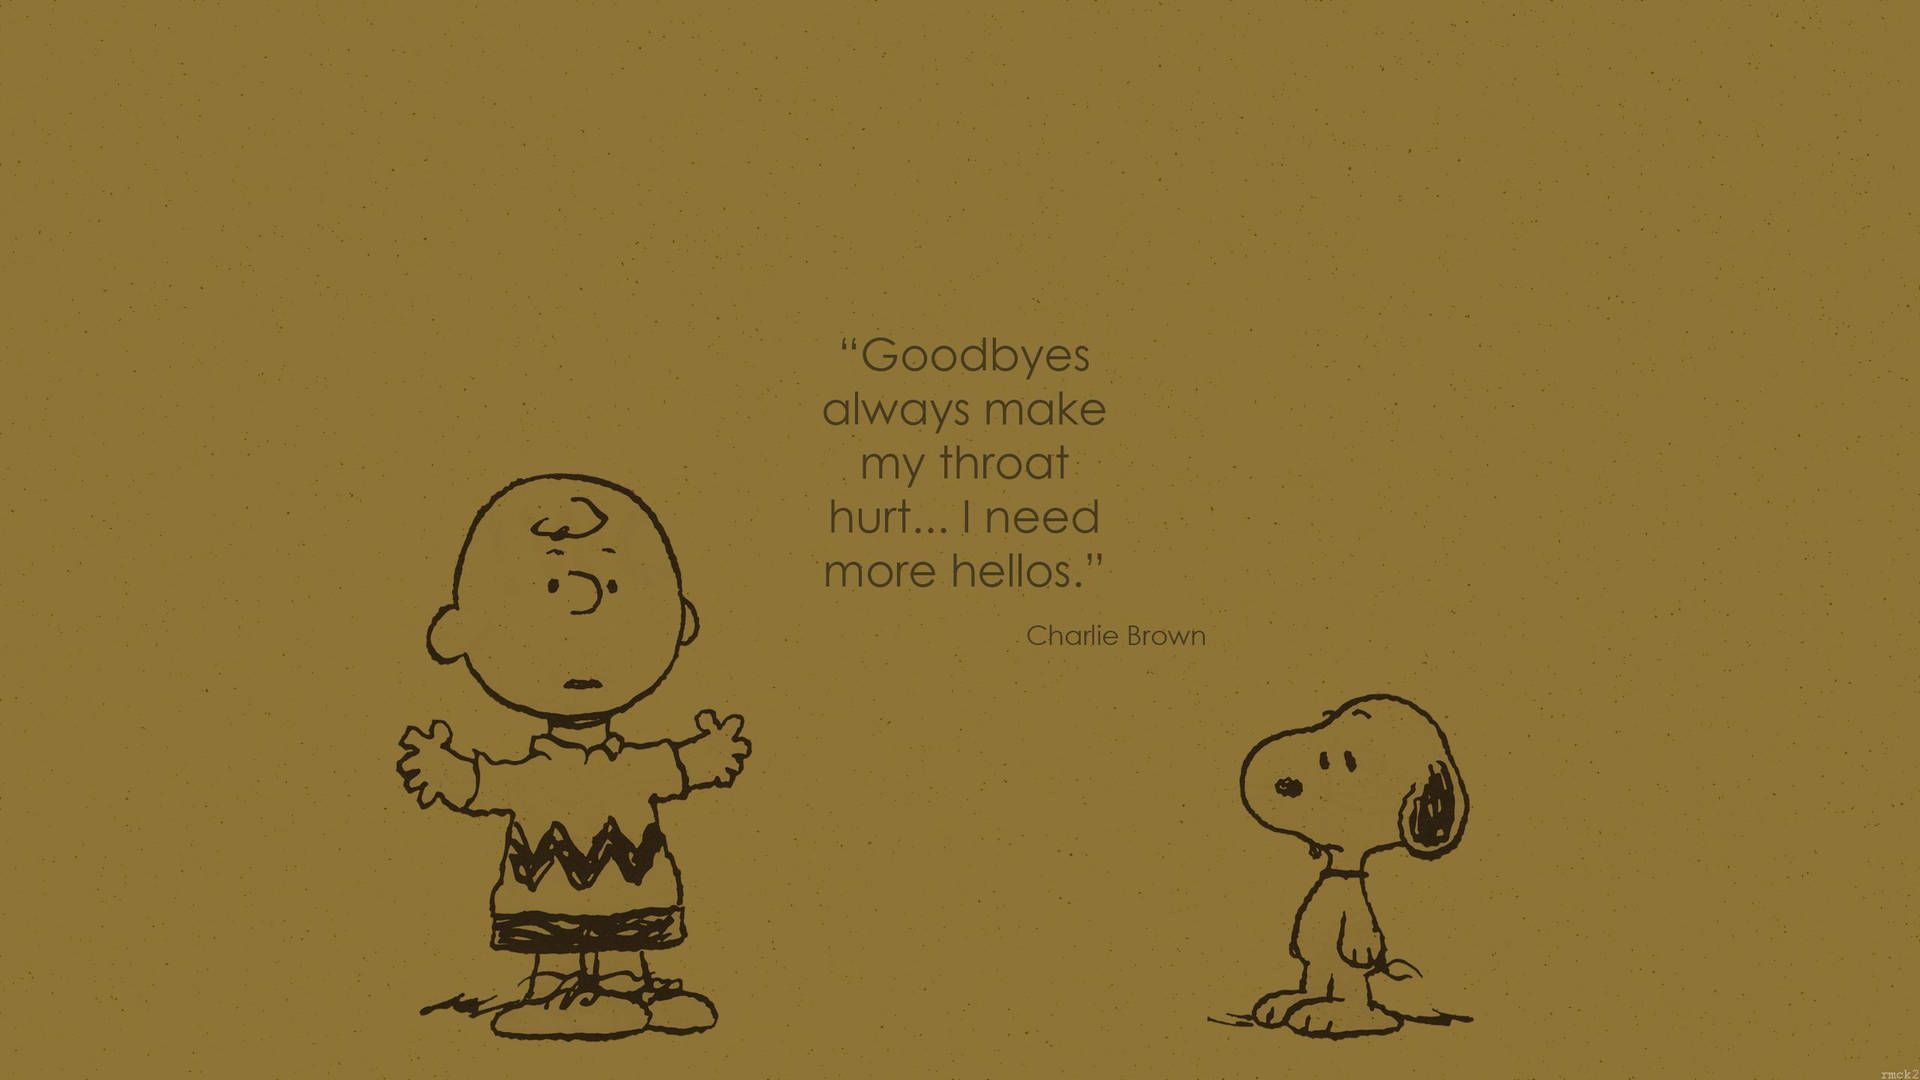 Charlie Brown and Snoopy wallpaper with quote. Goodbyes always make my throat hurt... I need more hellos. - Charlie Brown